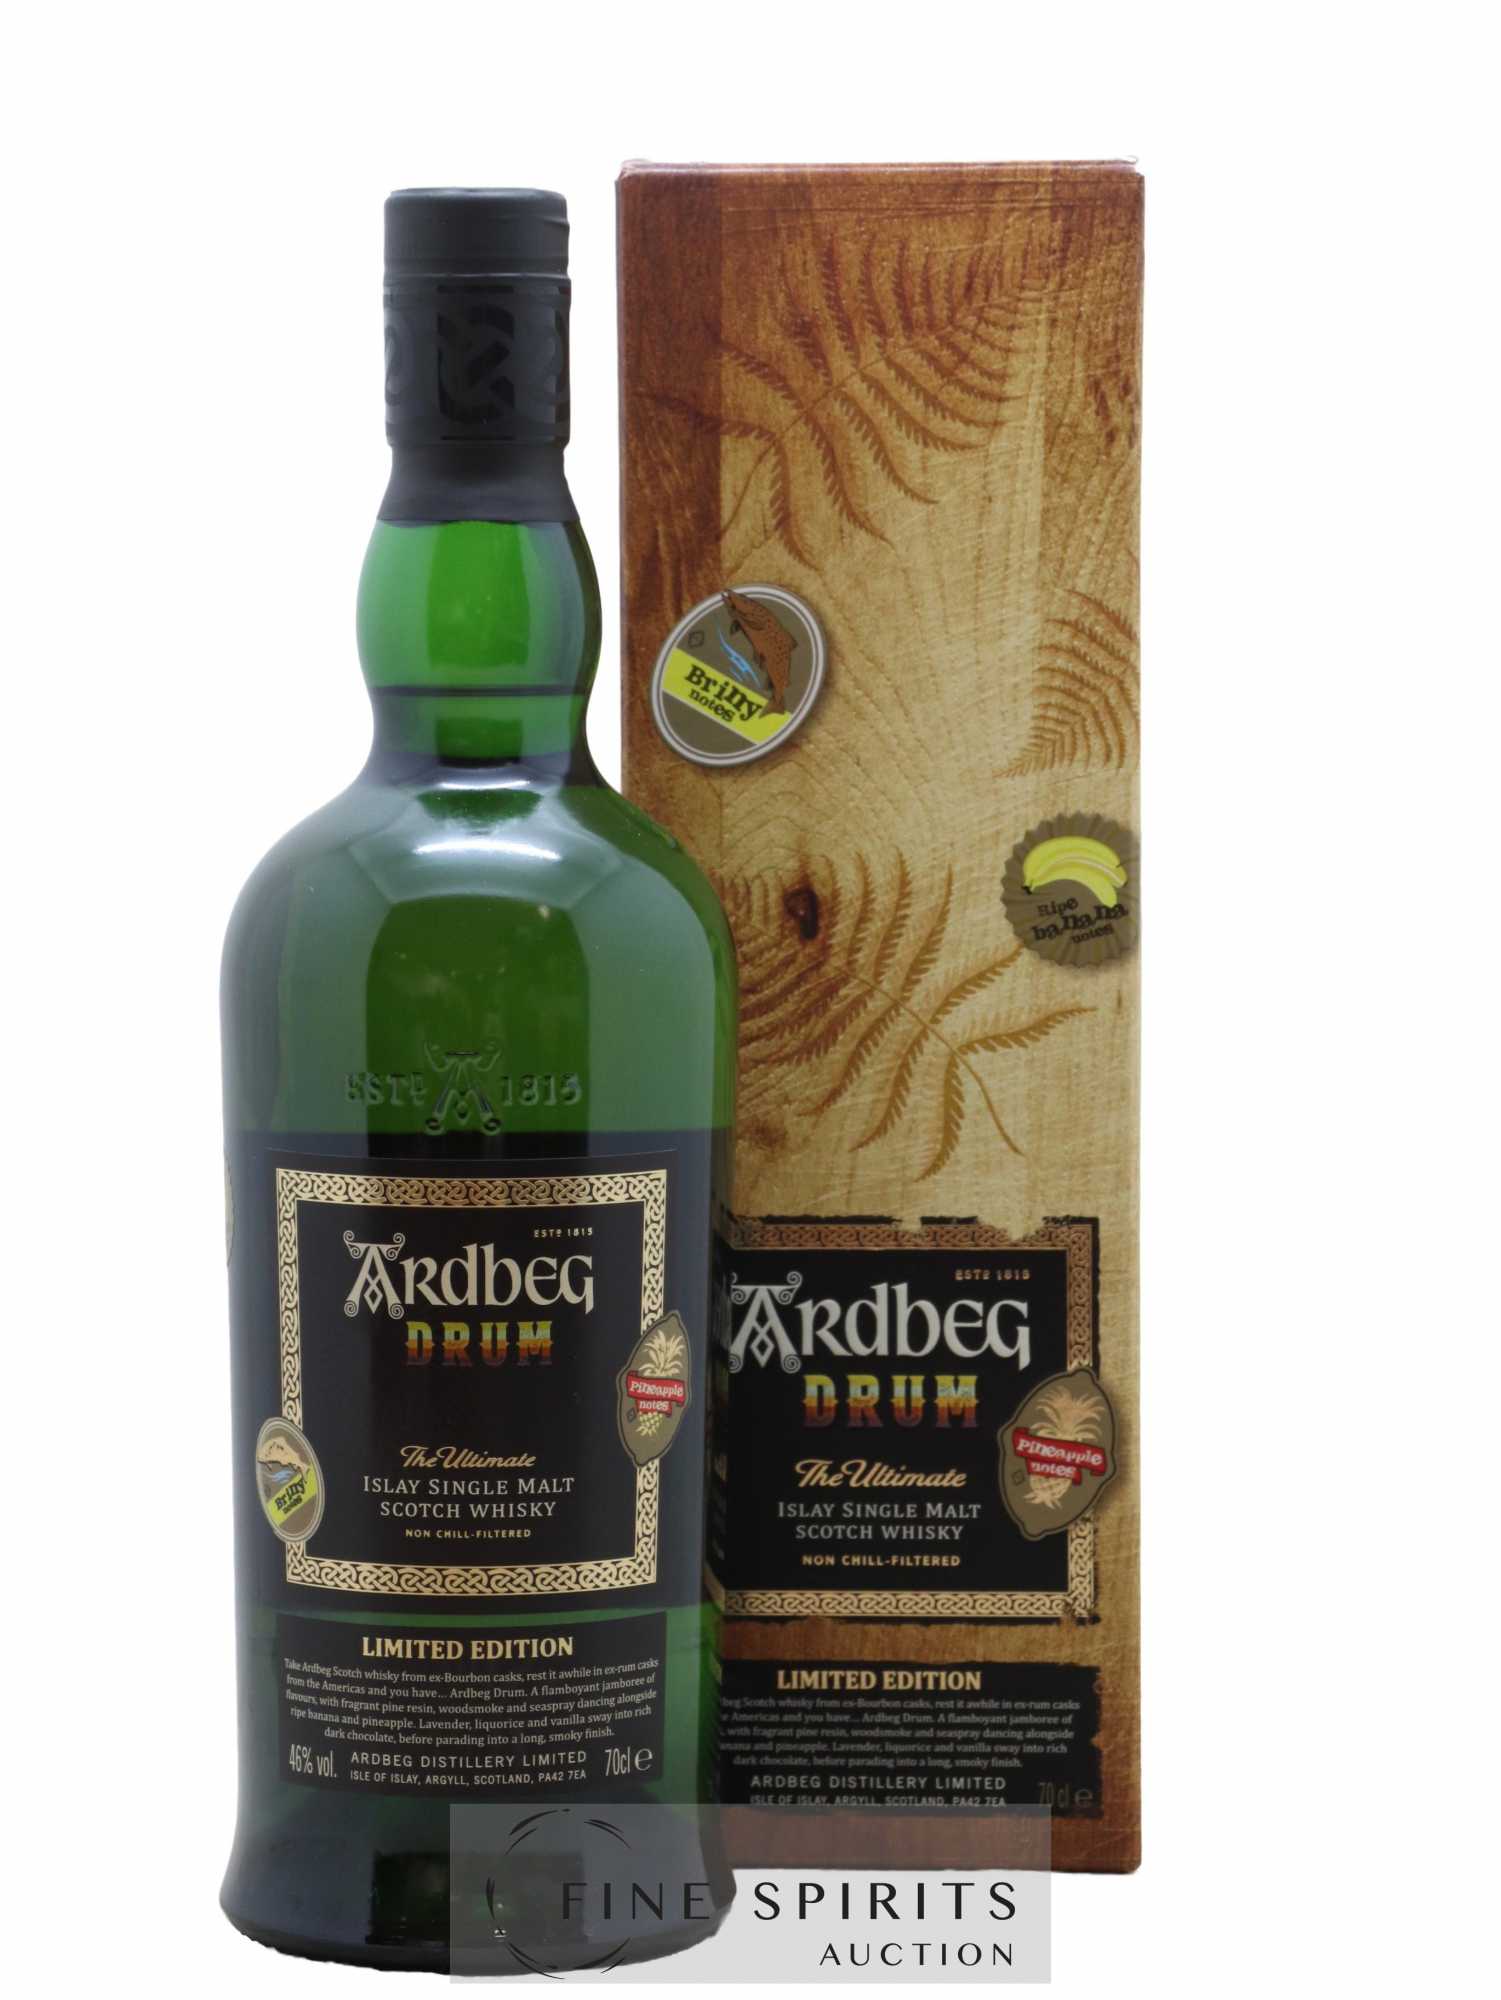 Ardbeg Of. Drum Limited Edition The Ultimate 